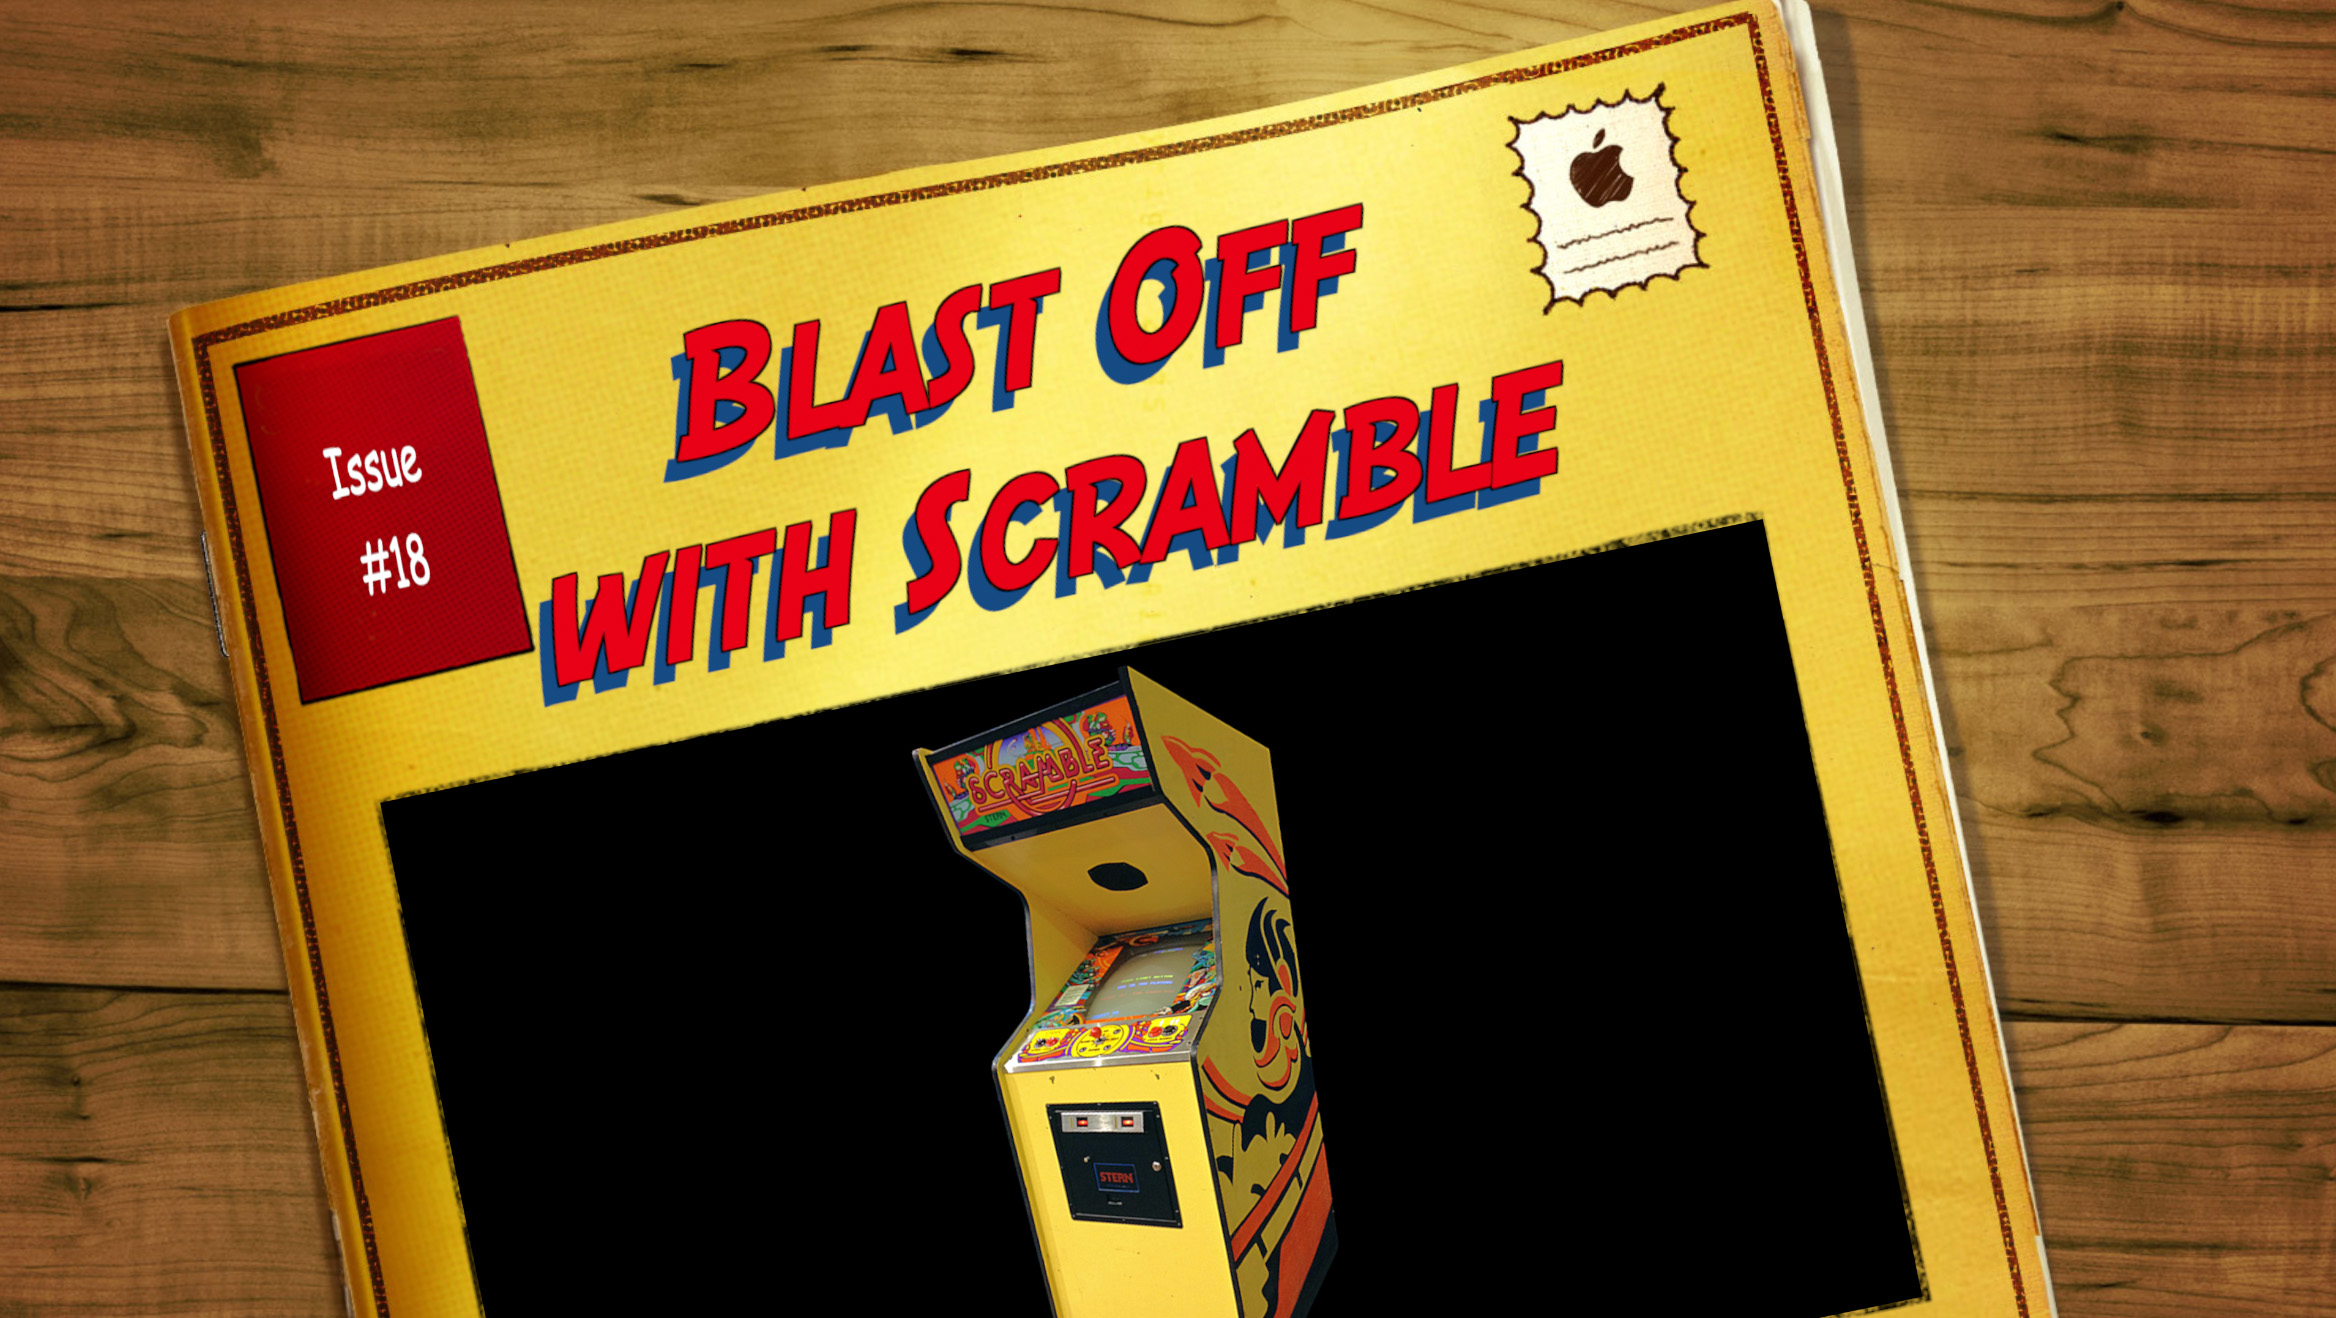 Issue#18 Blast Off with Scramble